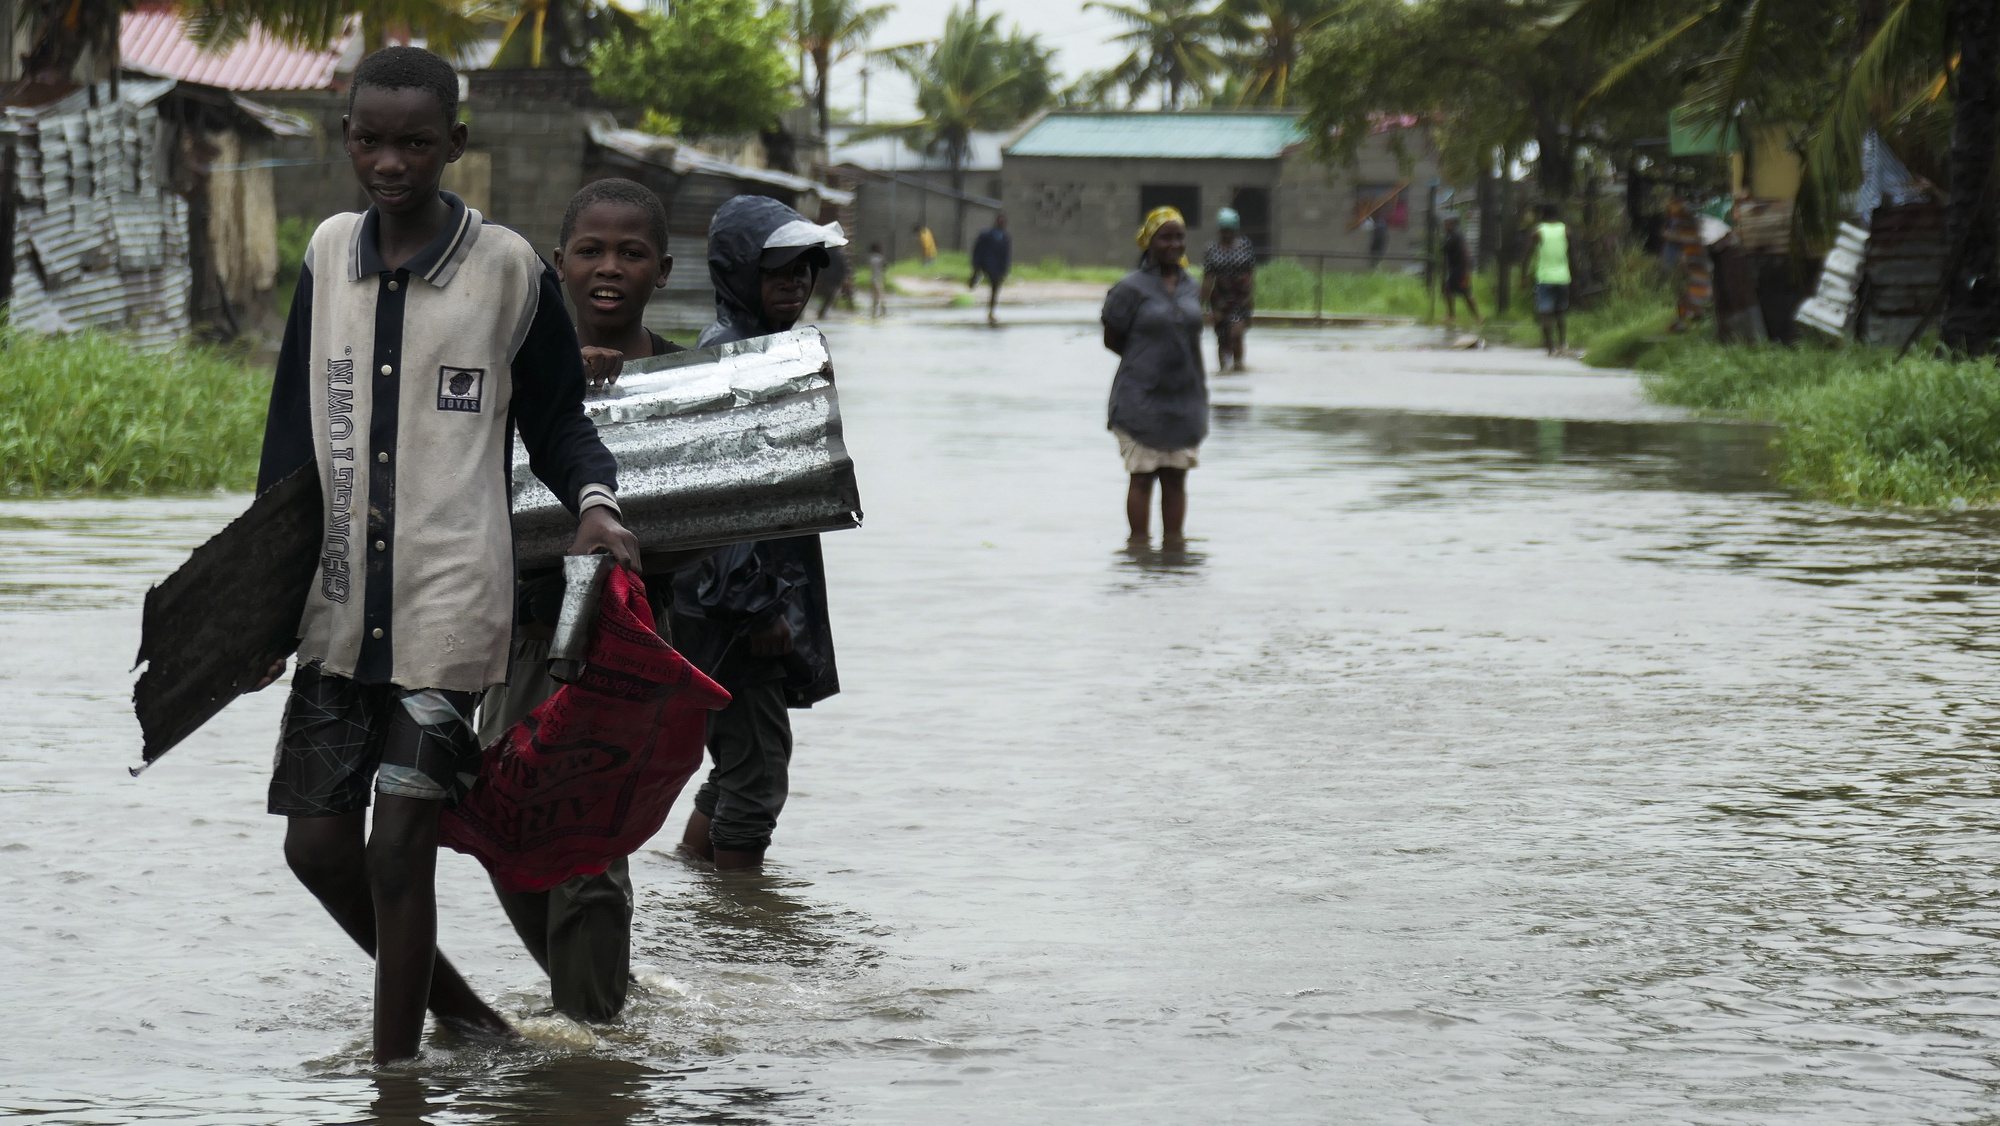 Kids passes on a flooded street near Quelimane, as the storm Freddy hits Mozambique, 11 March 2023. The provincial capital of Quelimane will be the largest urban area closest to the cyclone&#039;s point of arrival on the mainland, and its radius (of about 300 kilometres) is expected to extend from Marromeu to Pebane, then moving inland towards Cherimane and southern Malawi. This is one of the longest lasting storms ever, after it formed at the beginning of February in the Asian seas, crossing the entire Indian Ocean to the east African coast. ANDRE CATUEIRA/LUSA